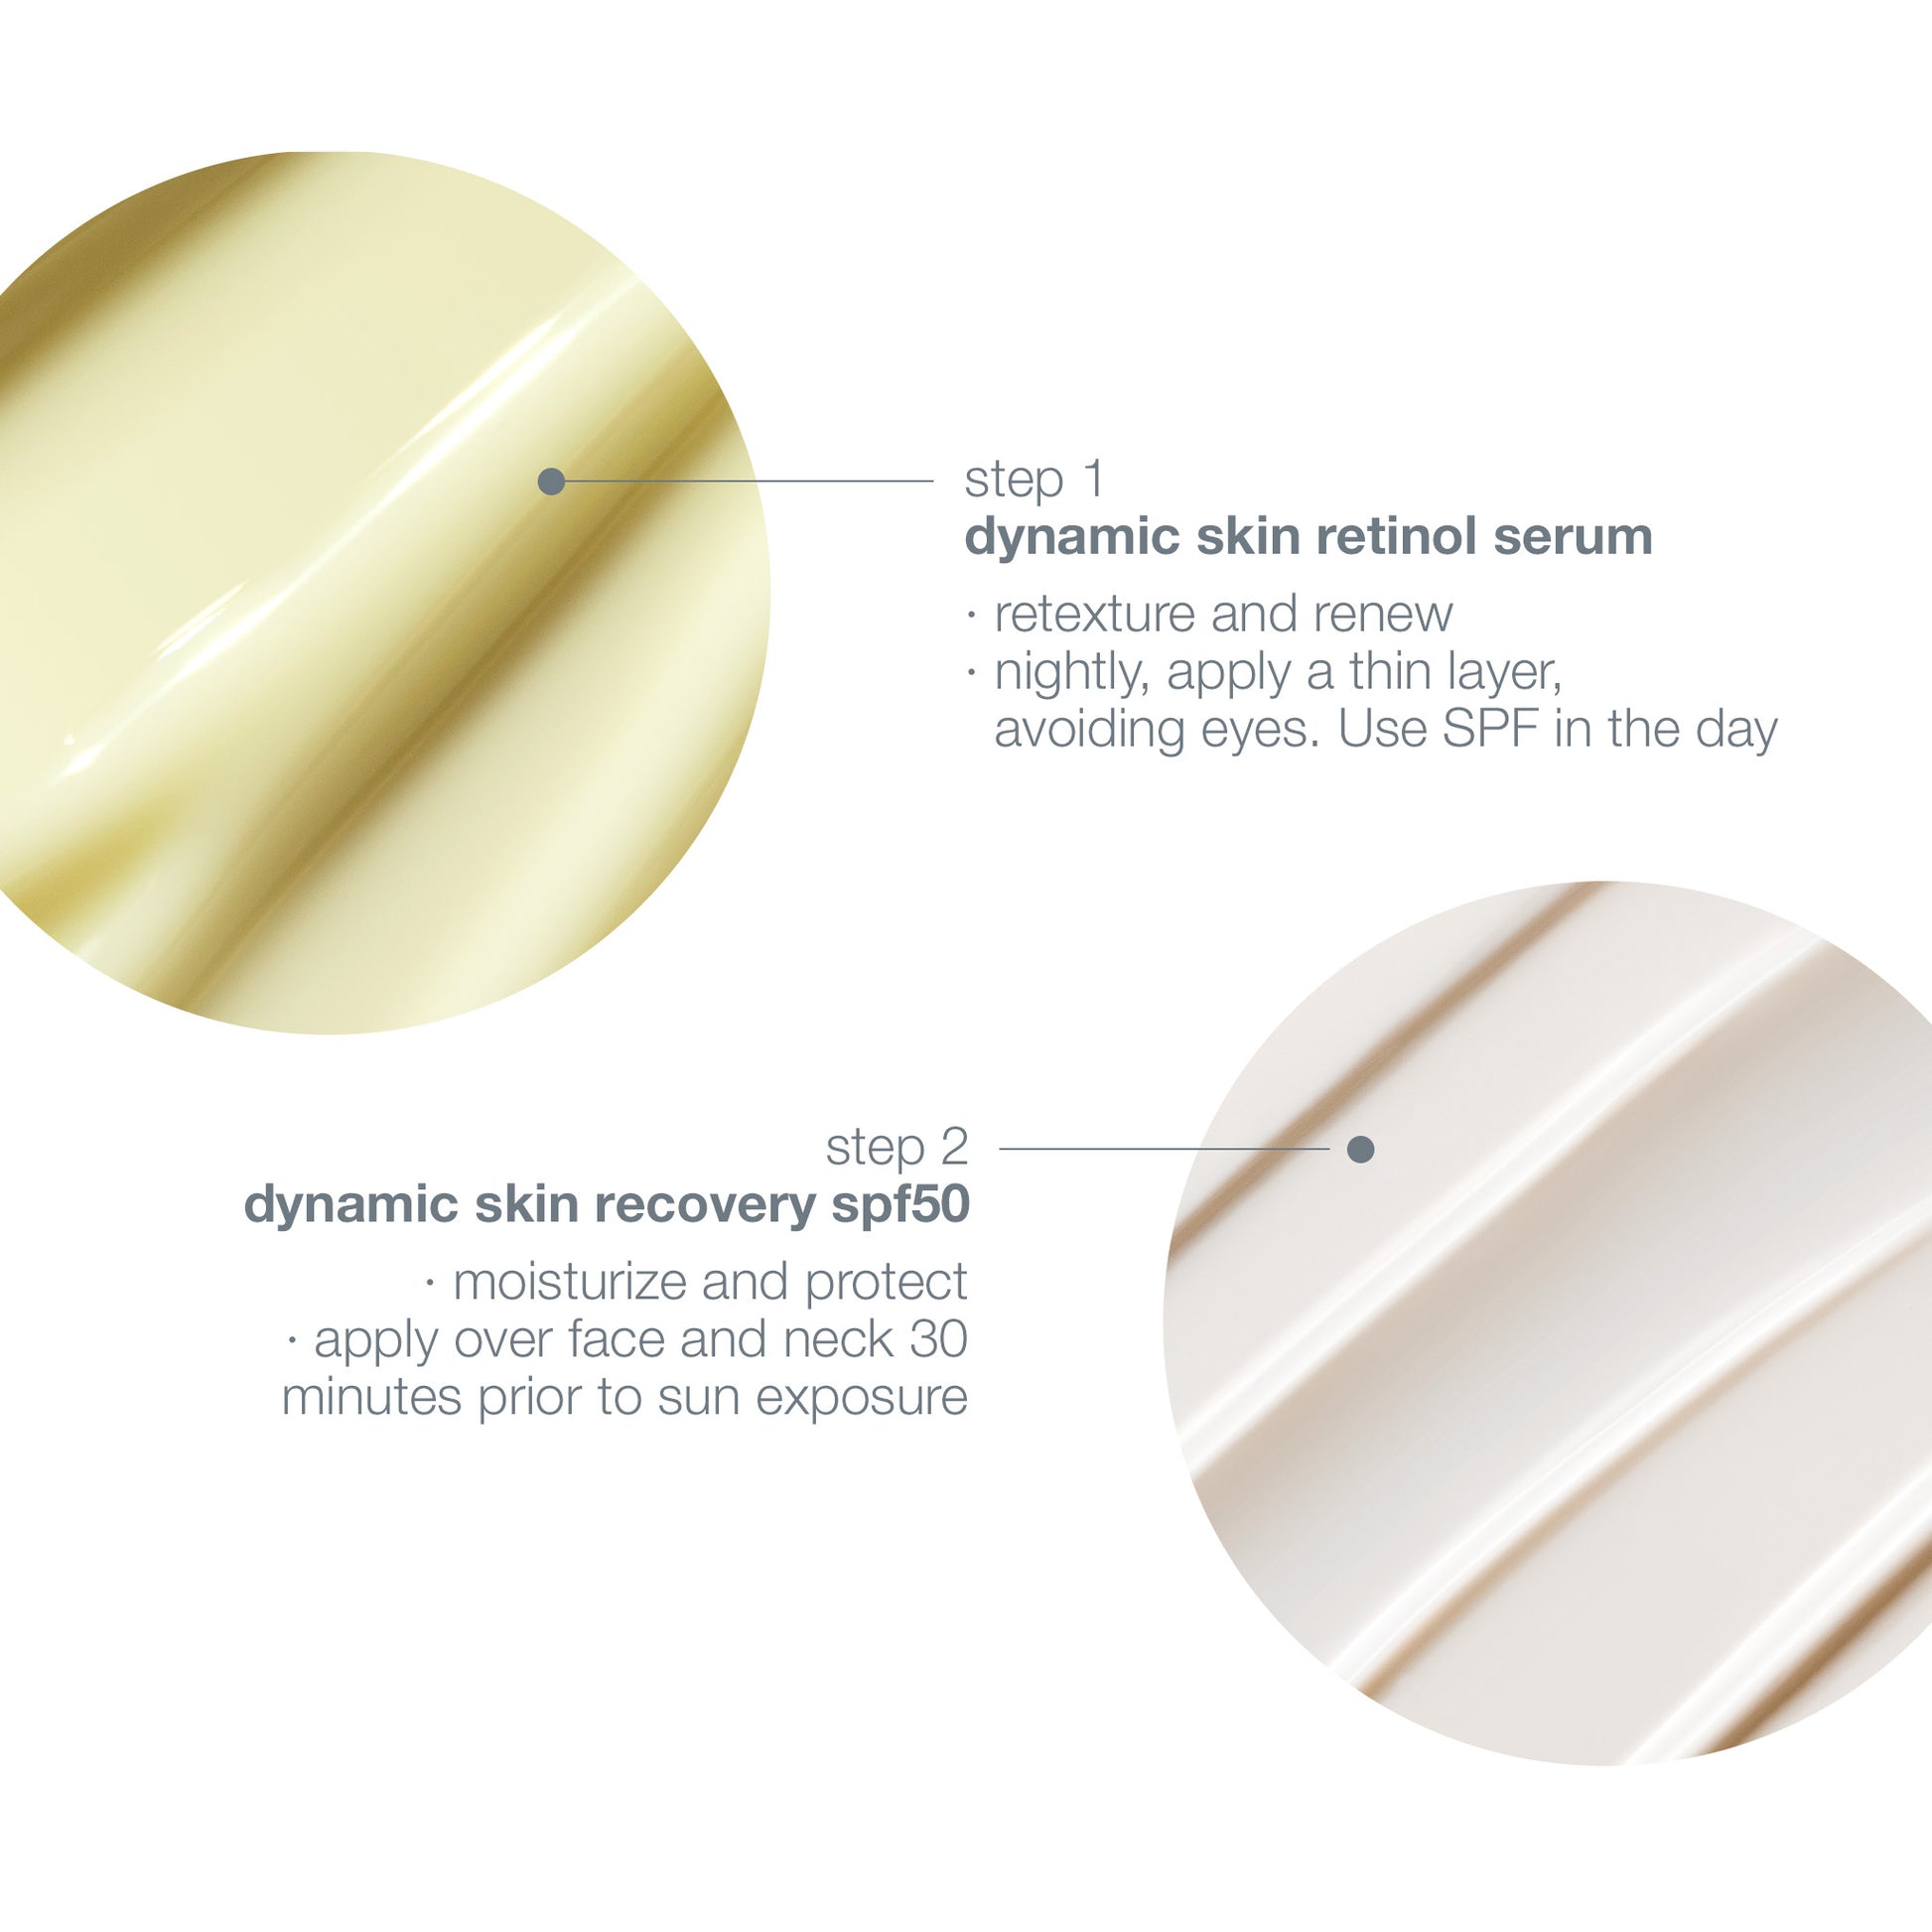 dynamic skin recovery spf50 duo benefits